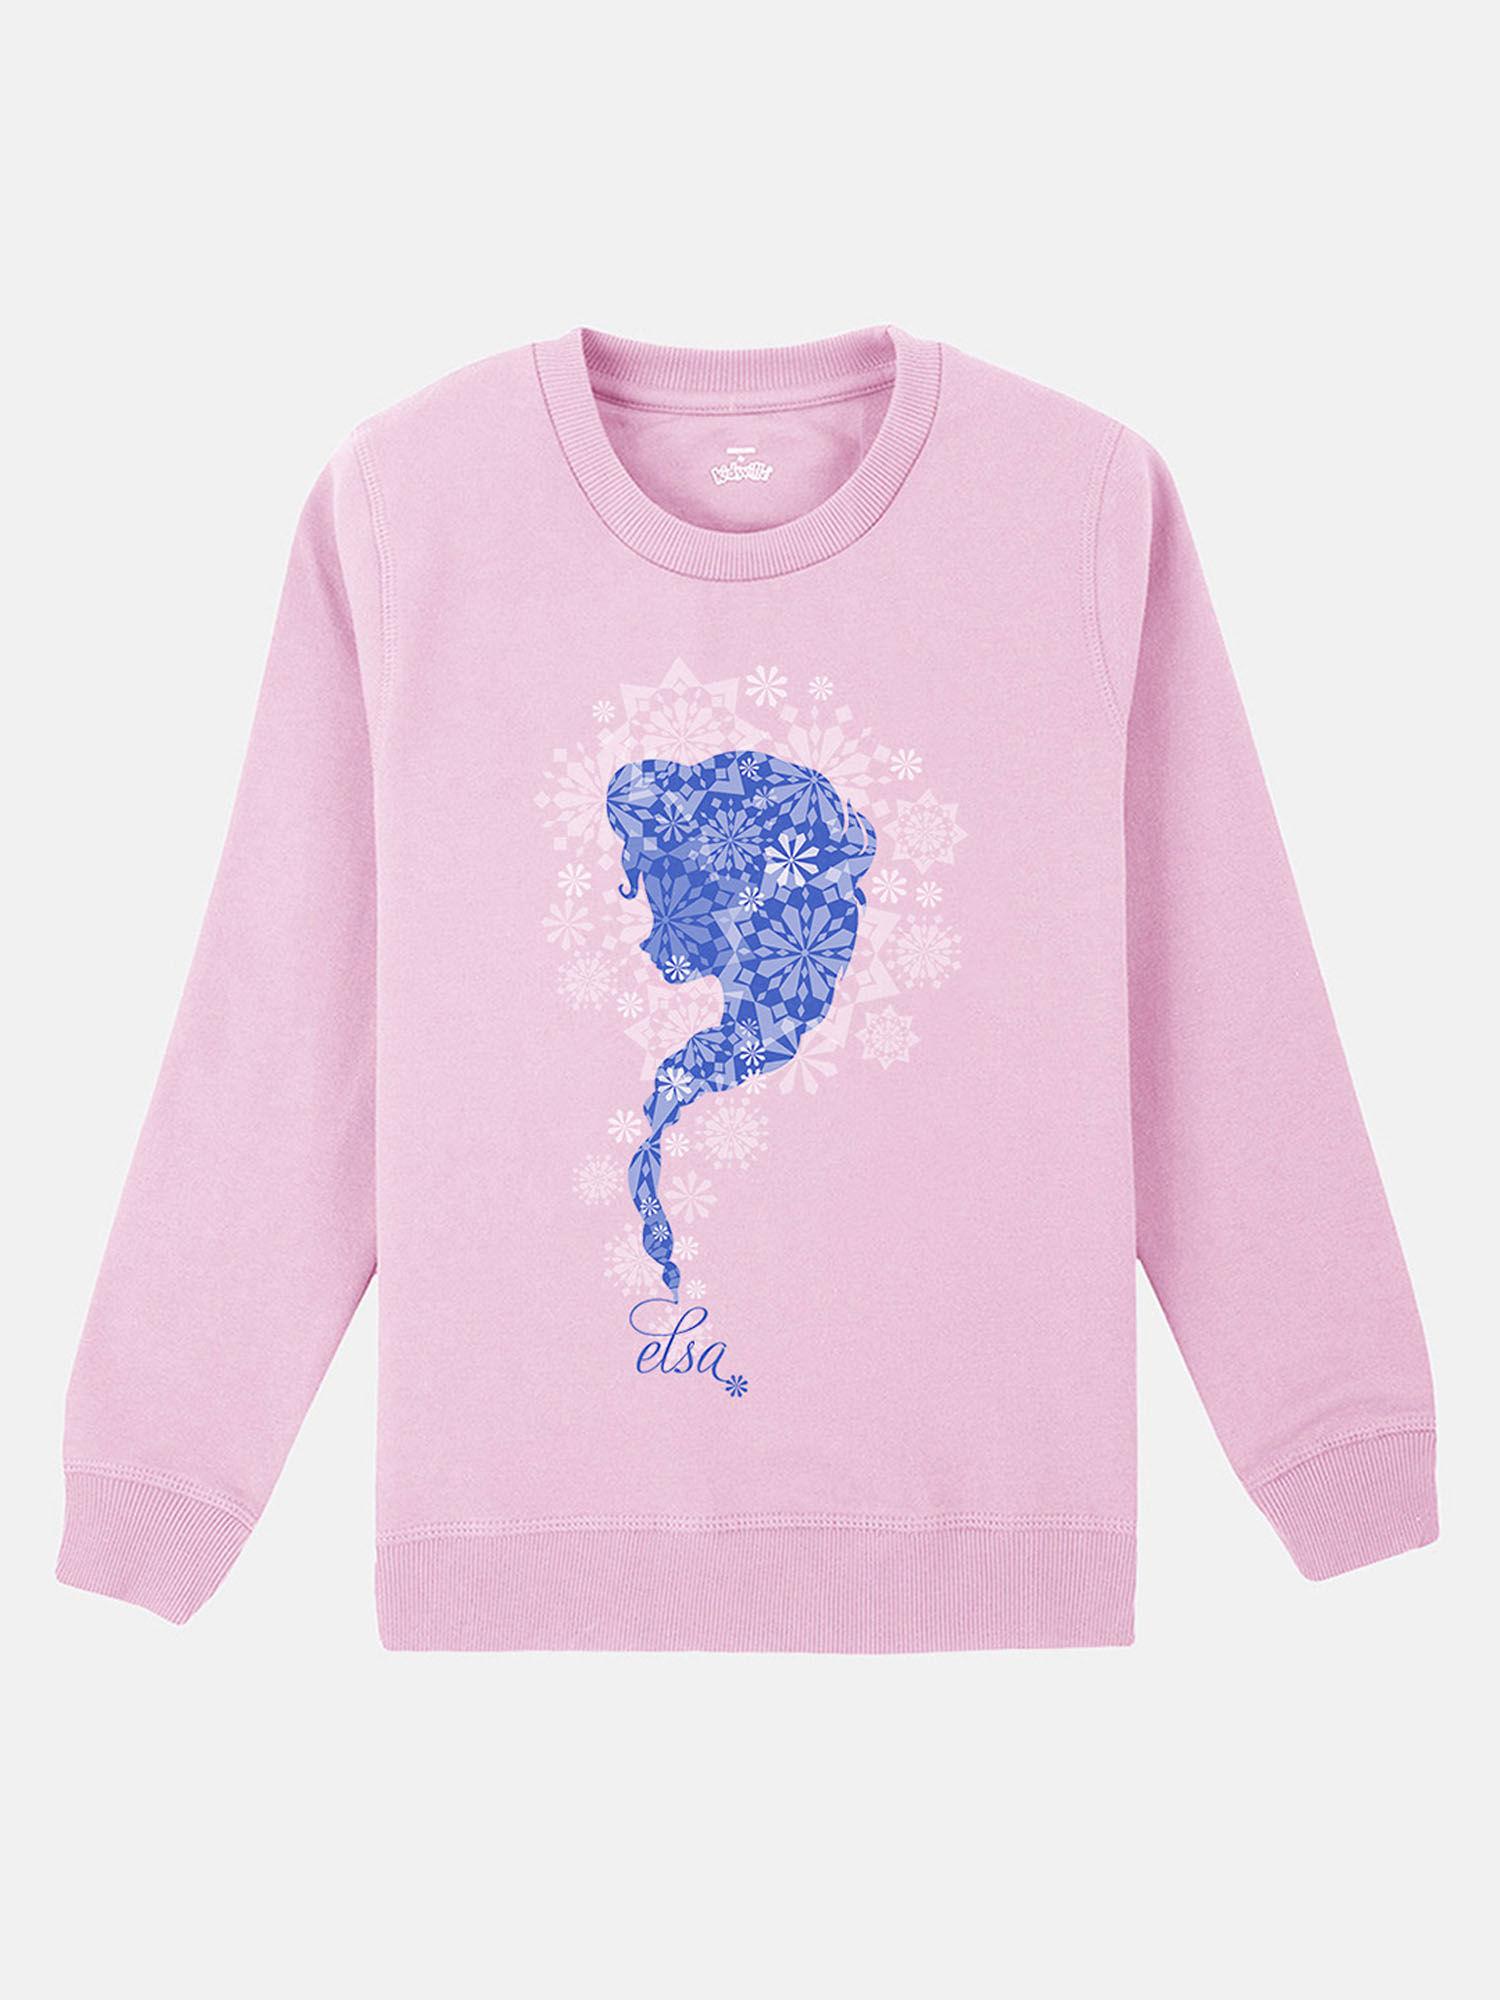 frozen printed pink full sleeve sweater